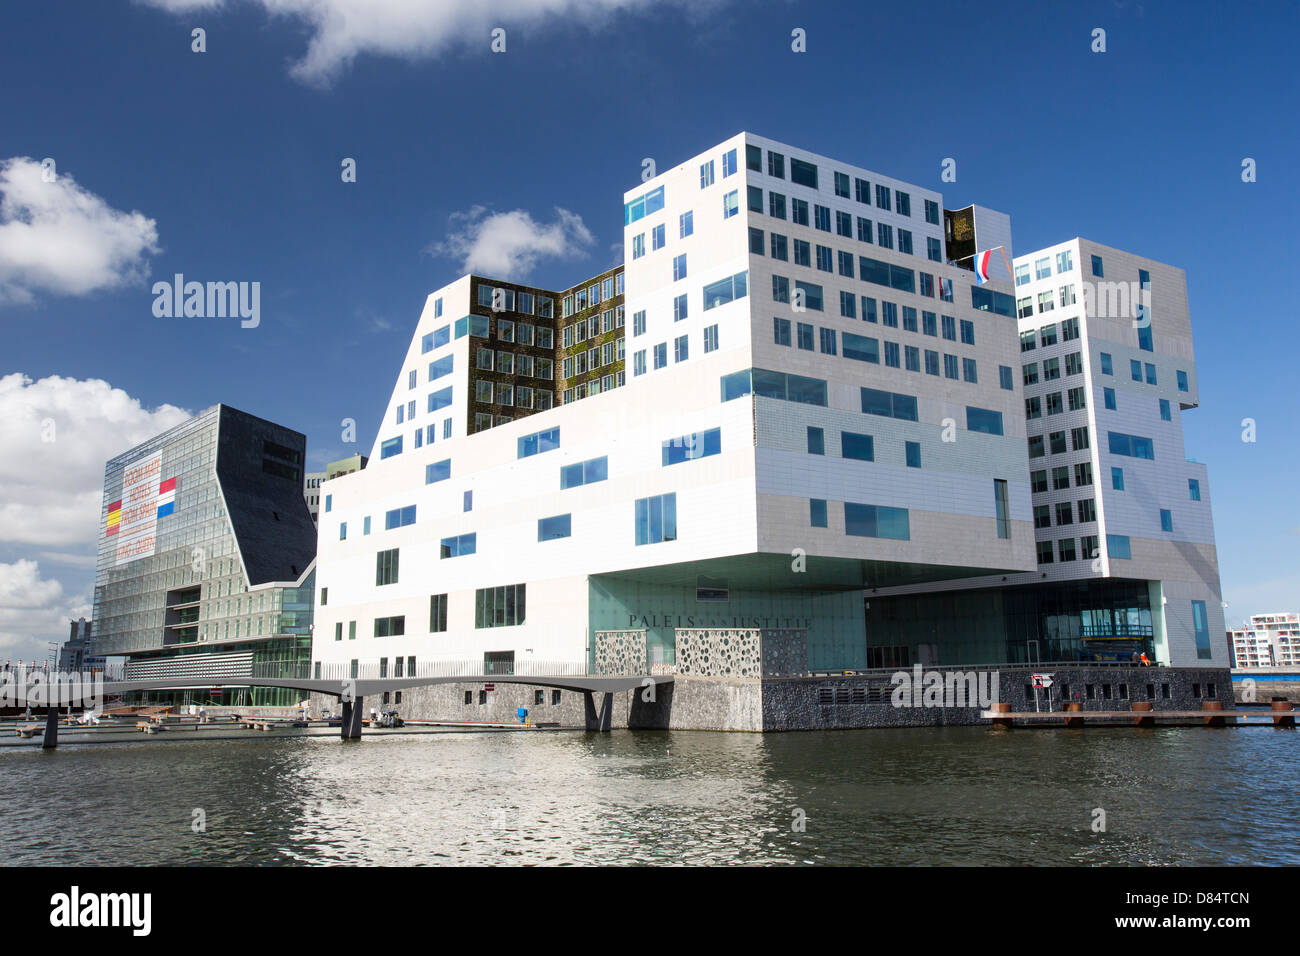 The modern Palace of Justice building in Amsterdam, Netherlands. Stock Photo